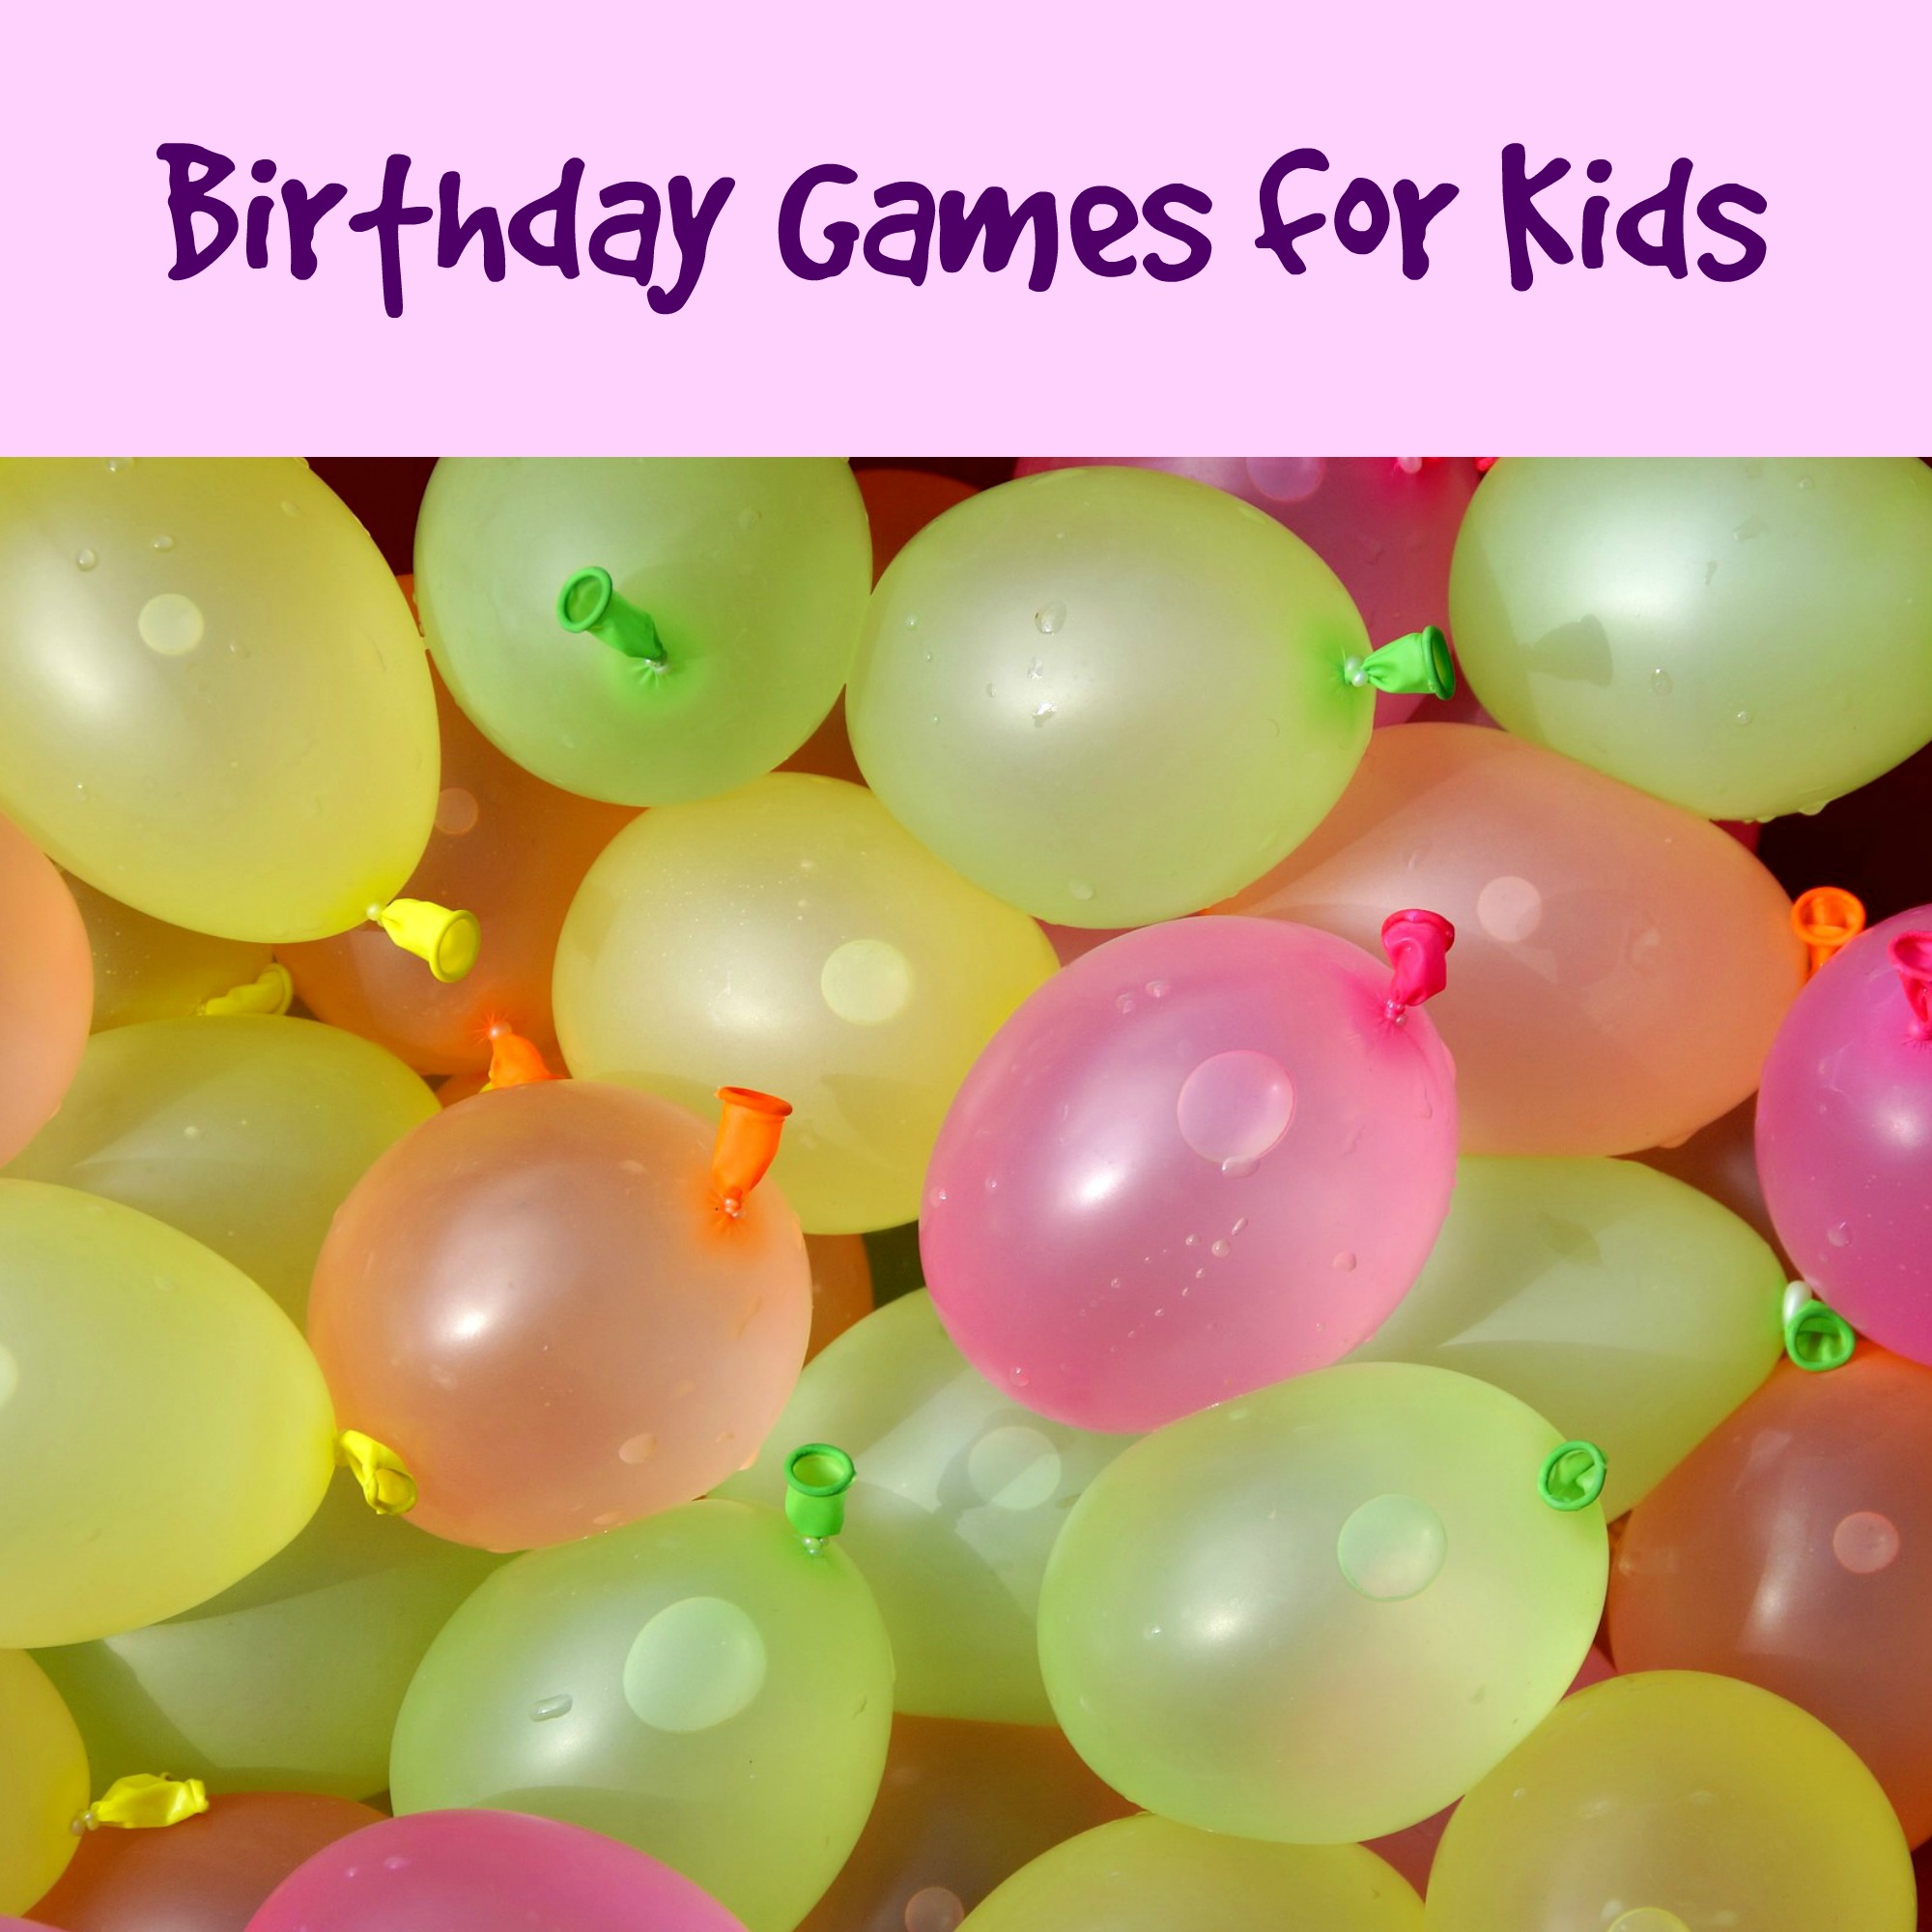 Awesome Entertaining Birthday Games for Kids